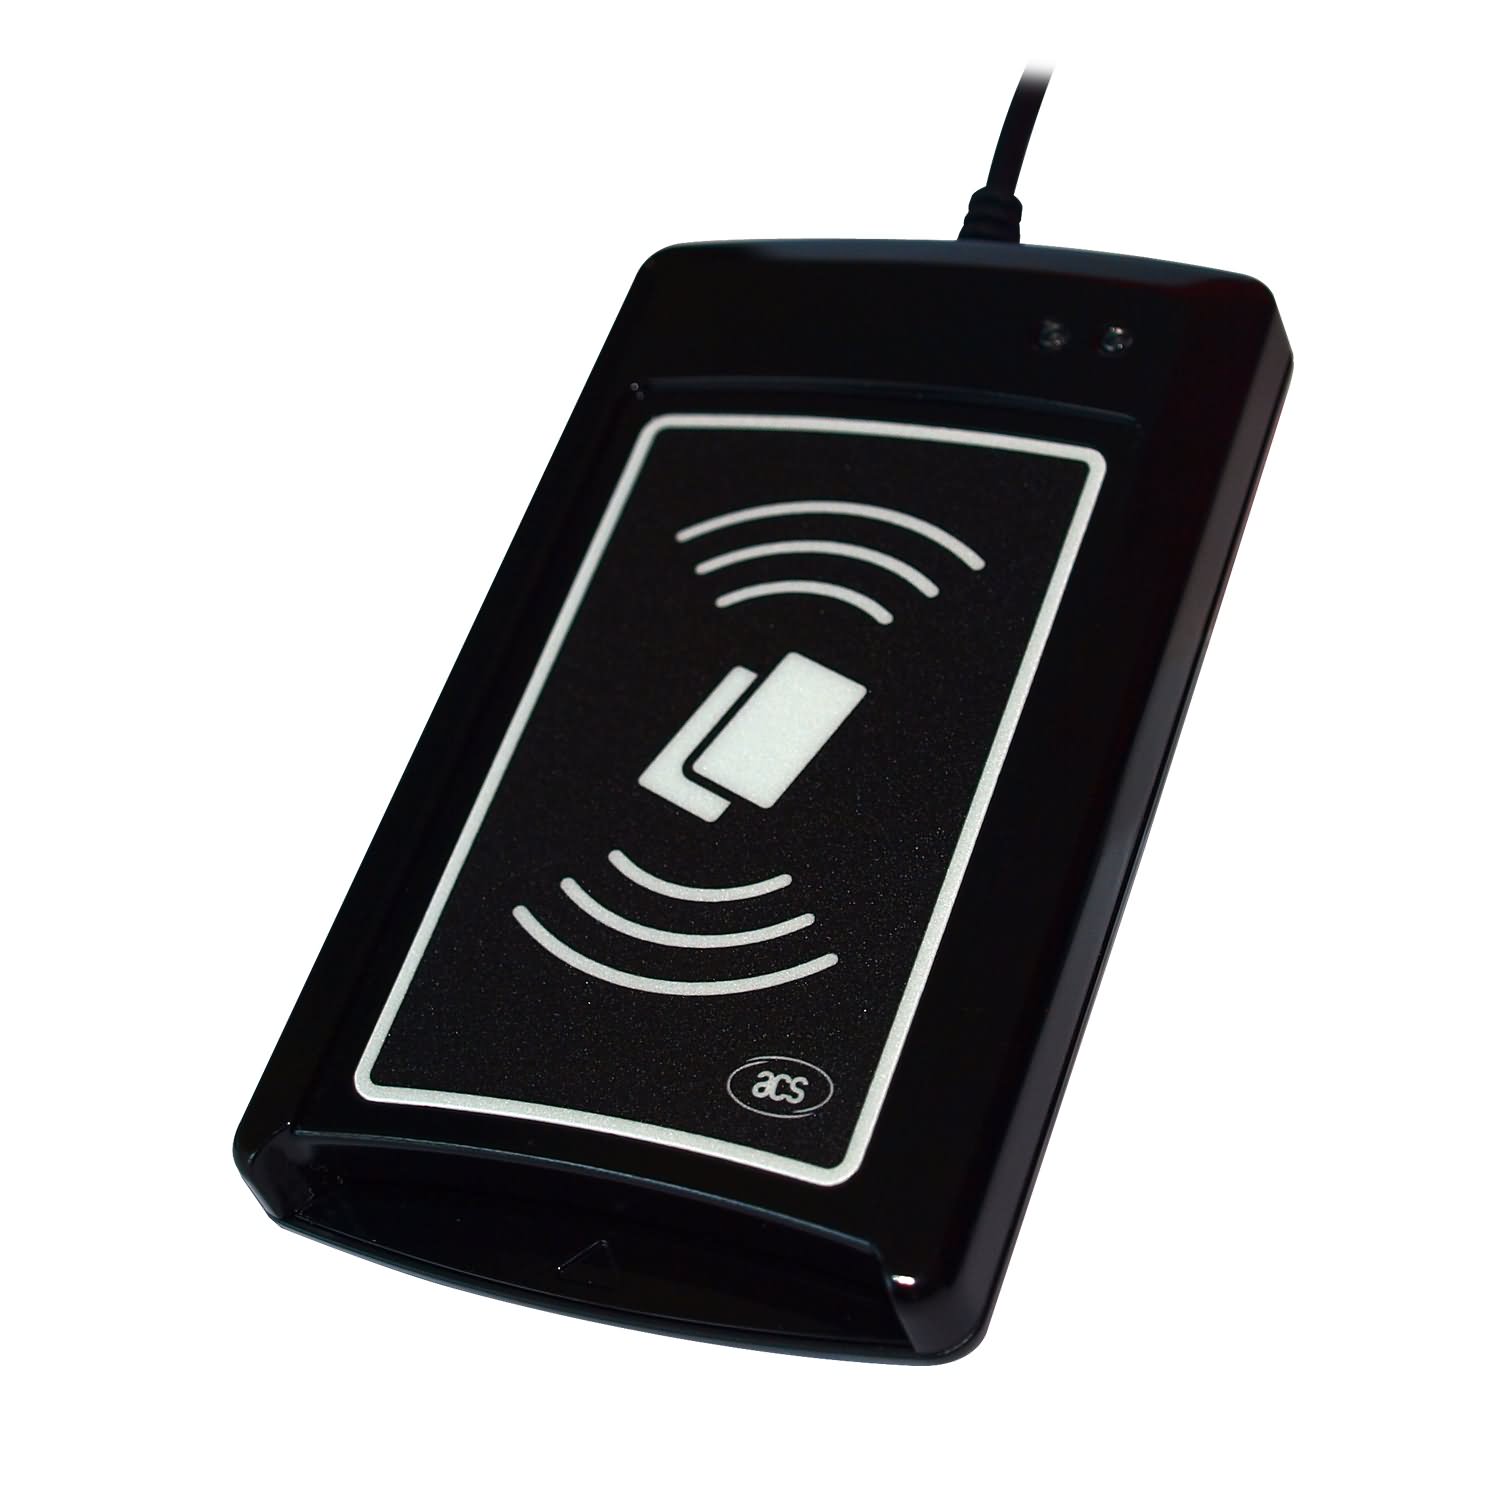 ACR1281S-C1 contact and contactless smart cards nfc reader Featured Image